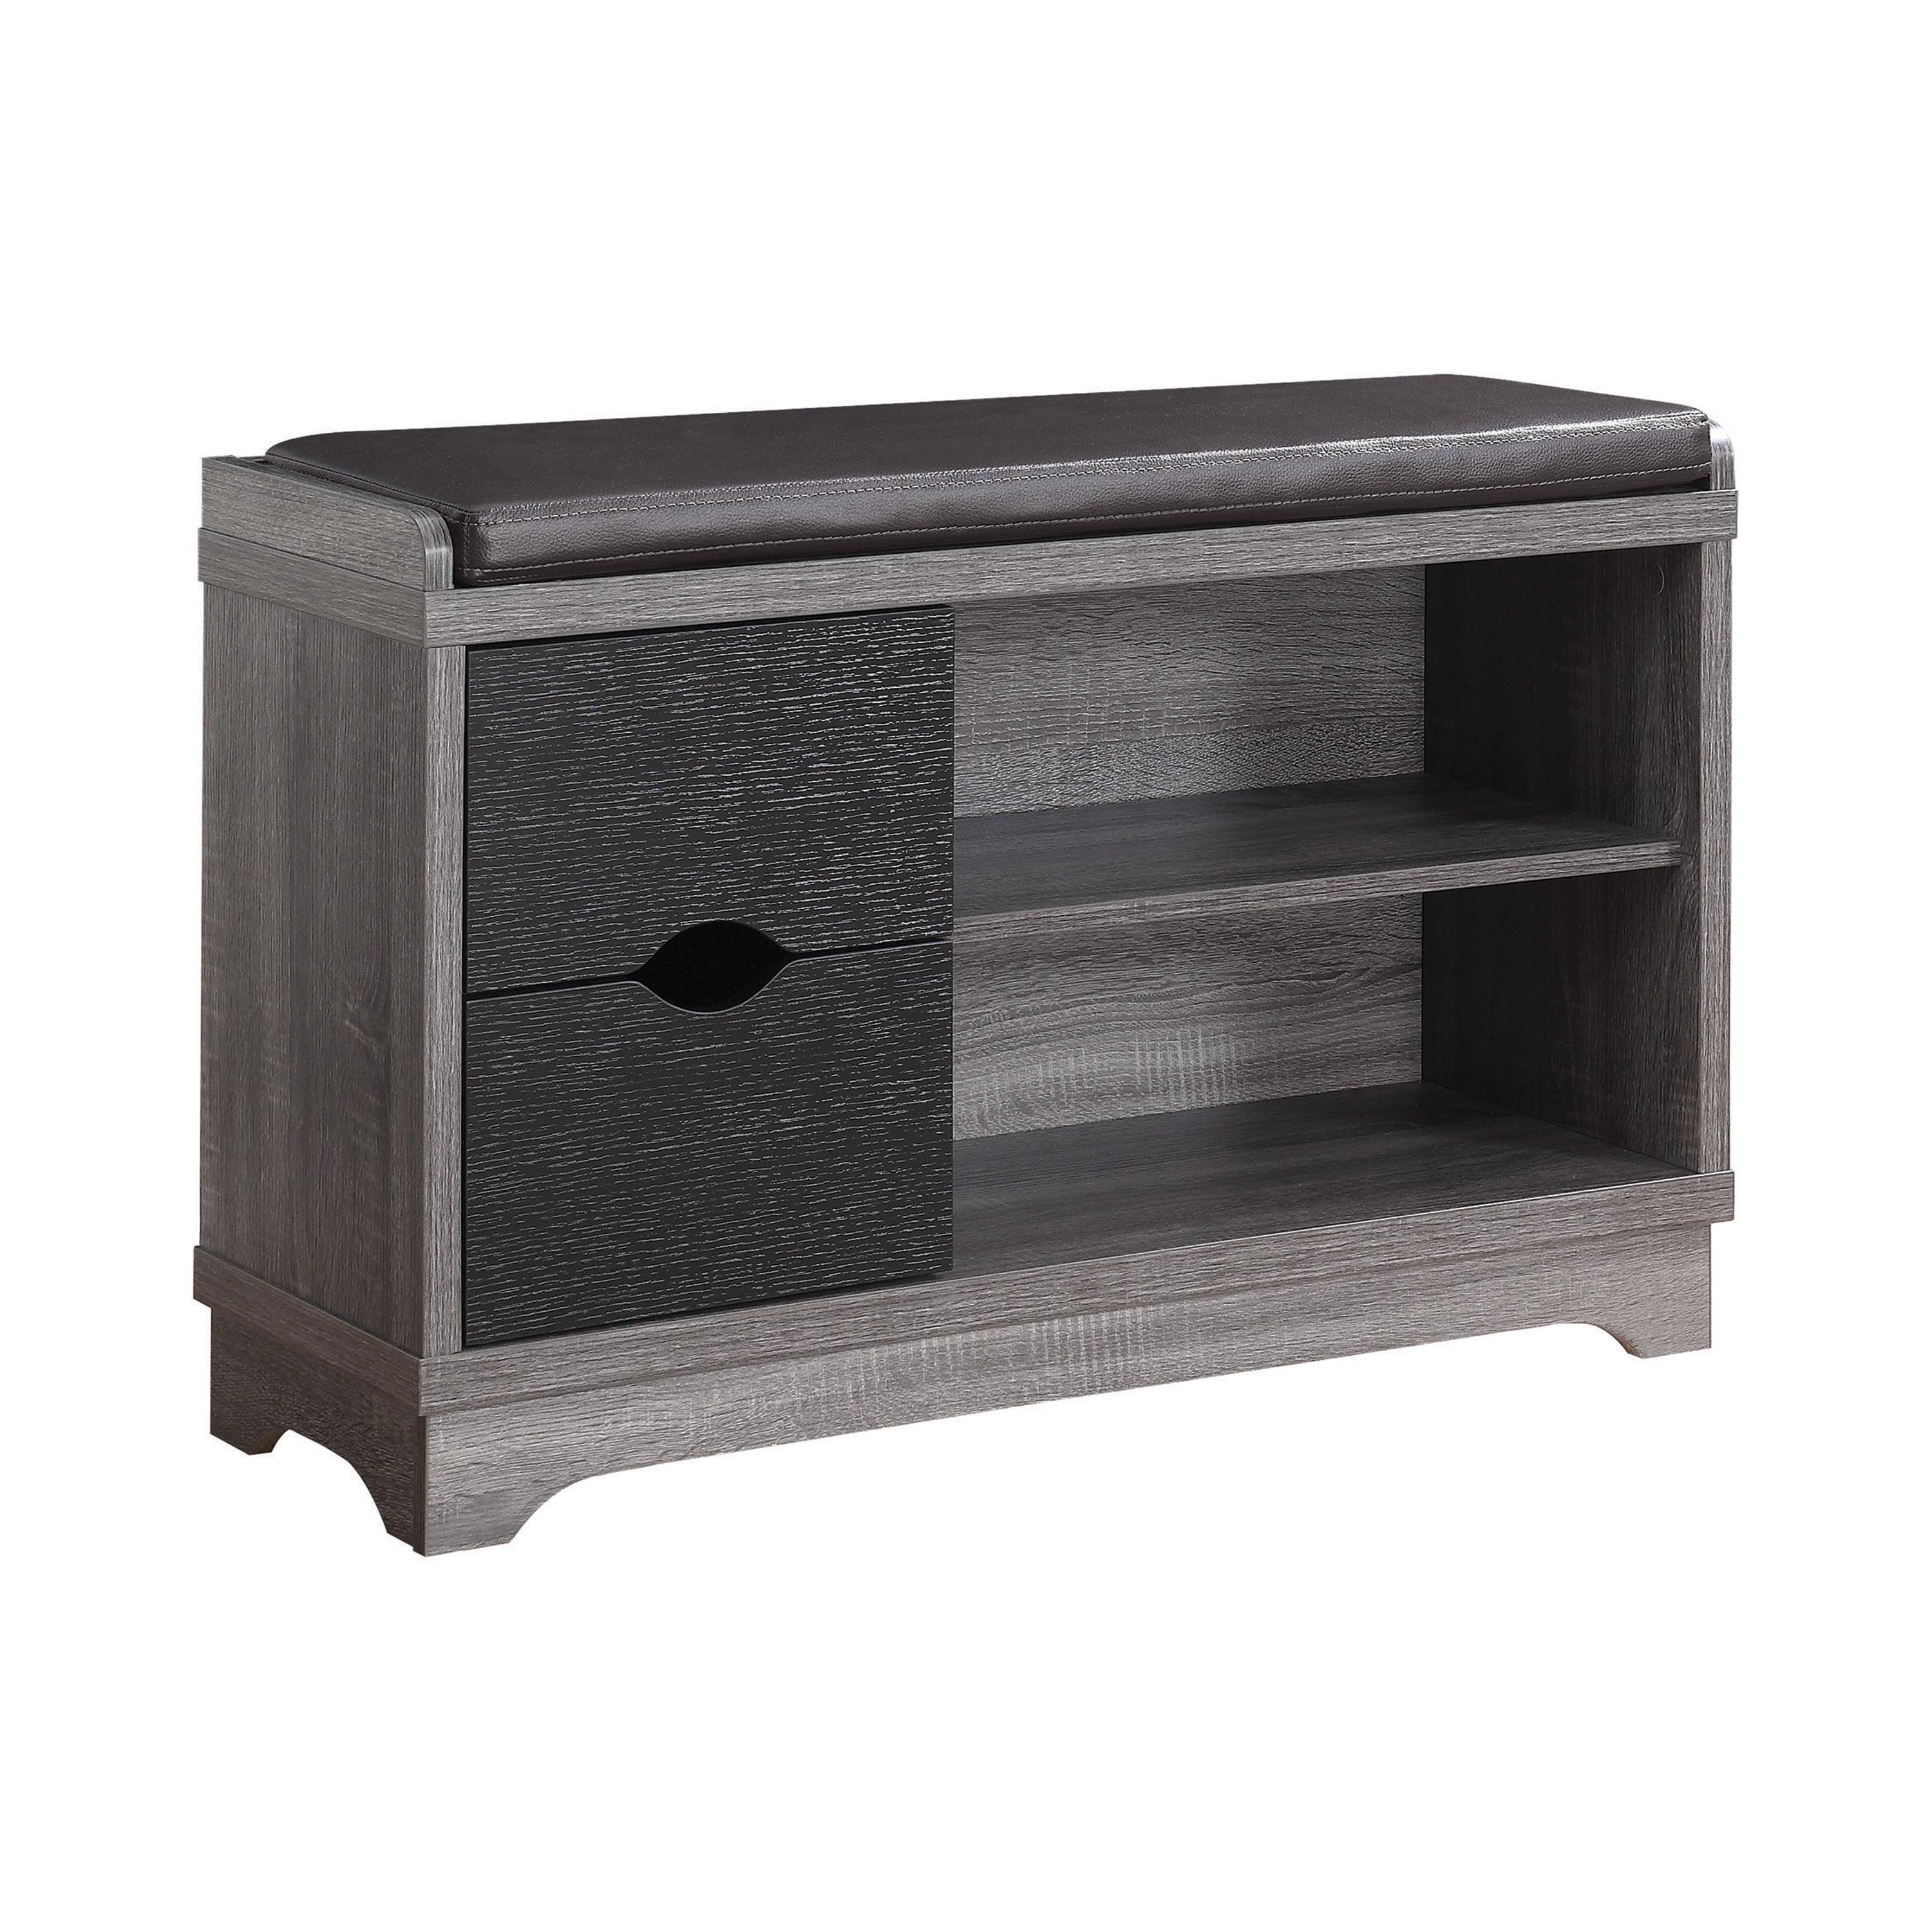 Transitional Black and Gray Storage Bench with Cushion